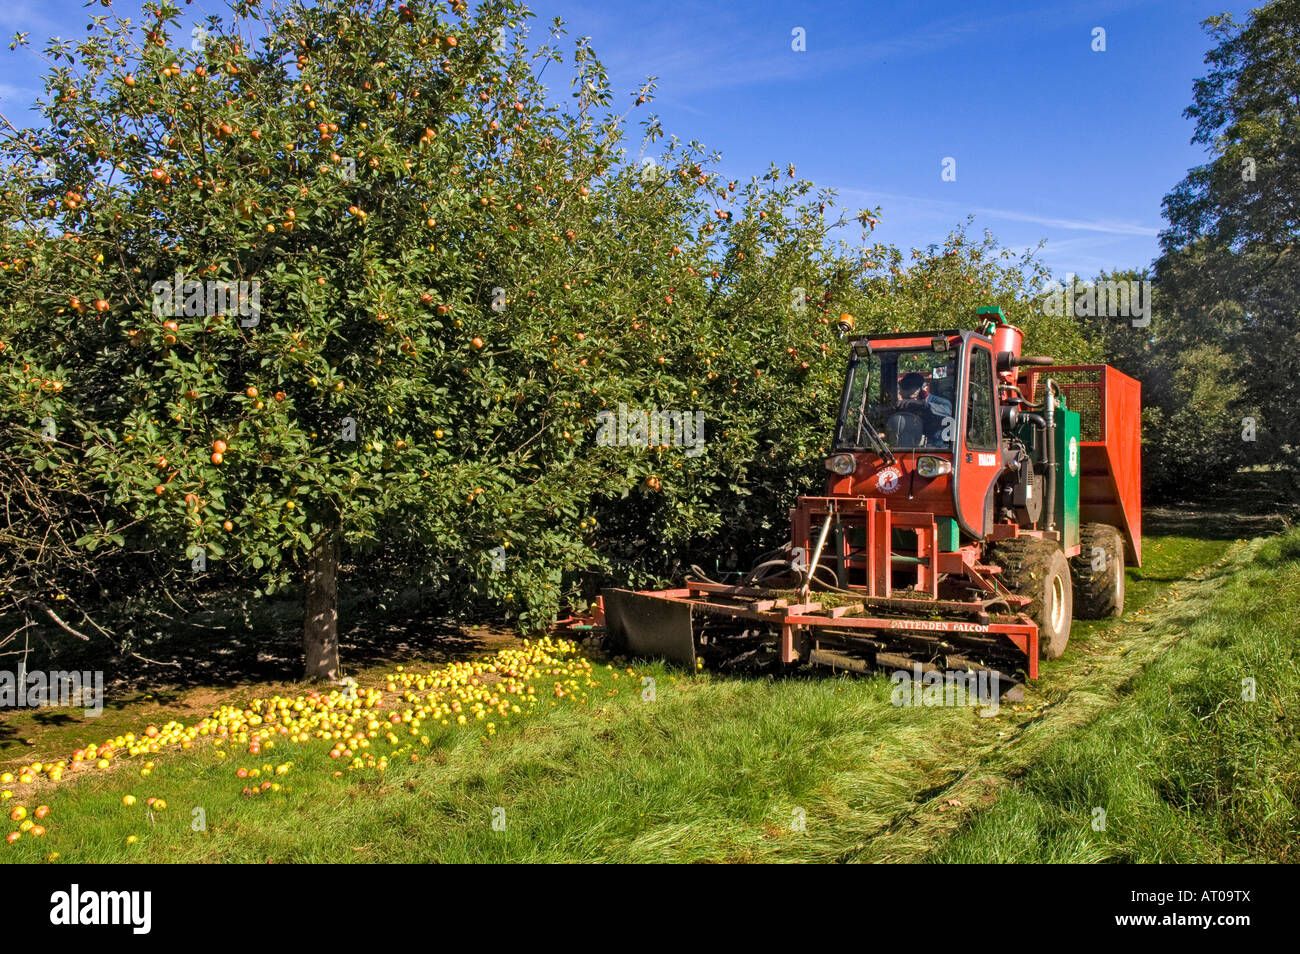 Cider apples being collected by machine at Thatchers Cider Orchard Sandford Somerset England Stock Photo